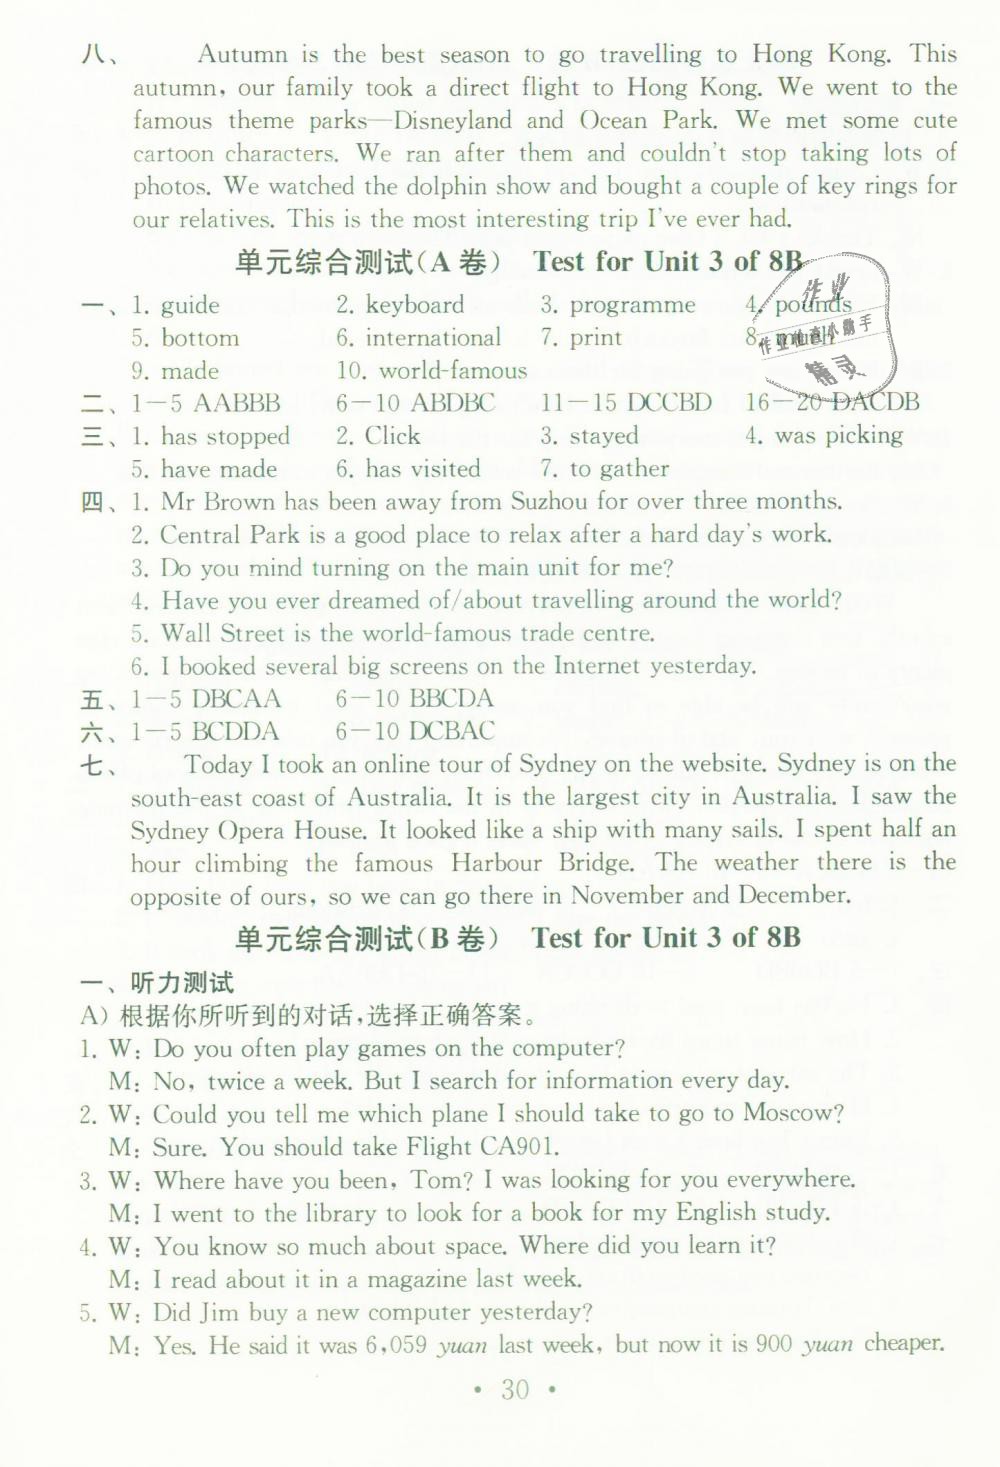 Test for Unit 3 of 8B B卷 - 第28页